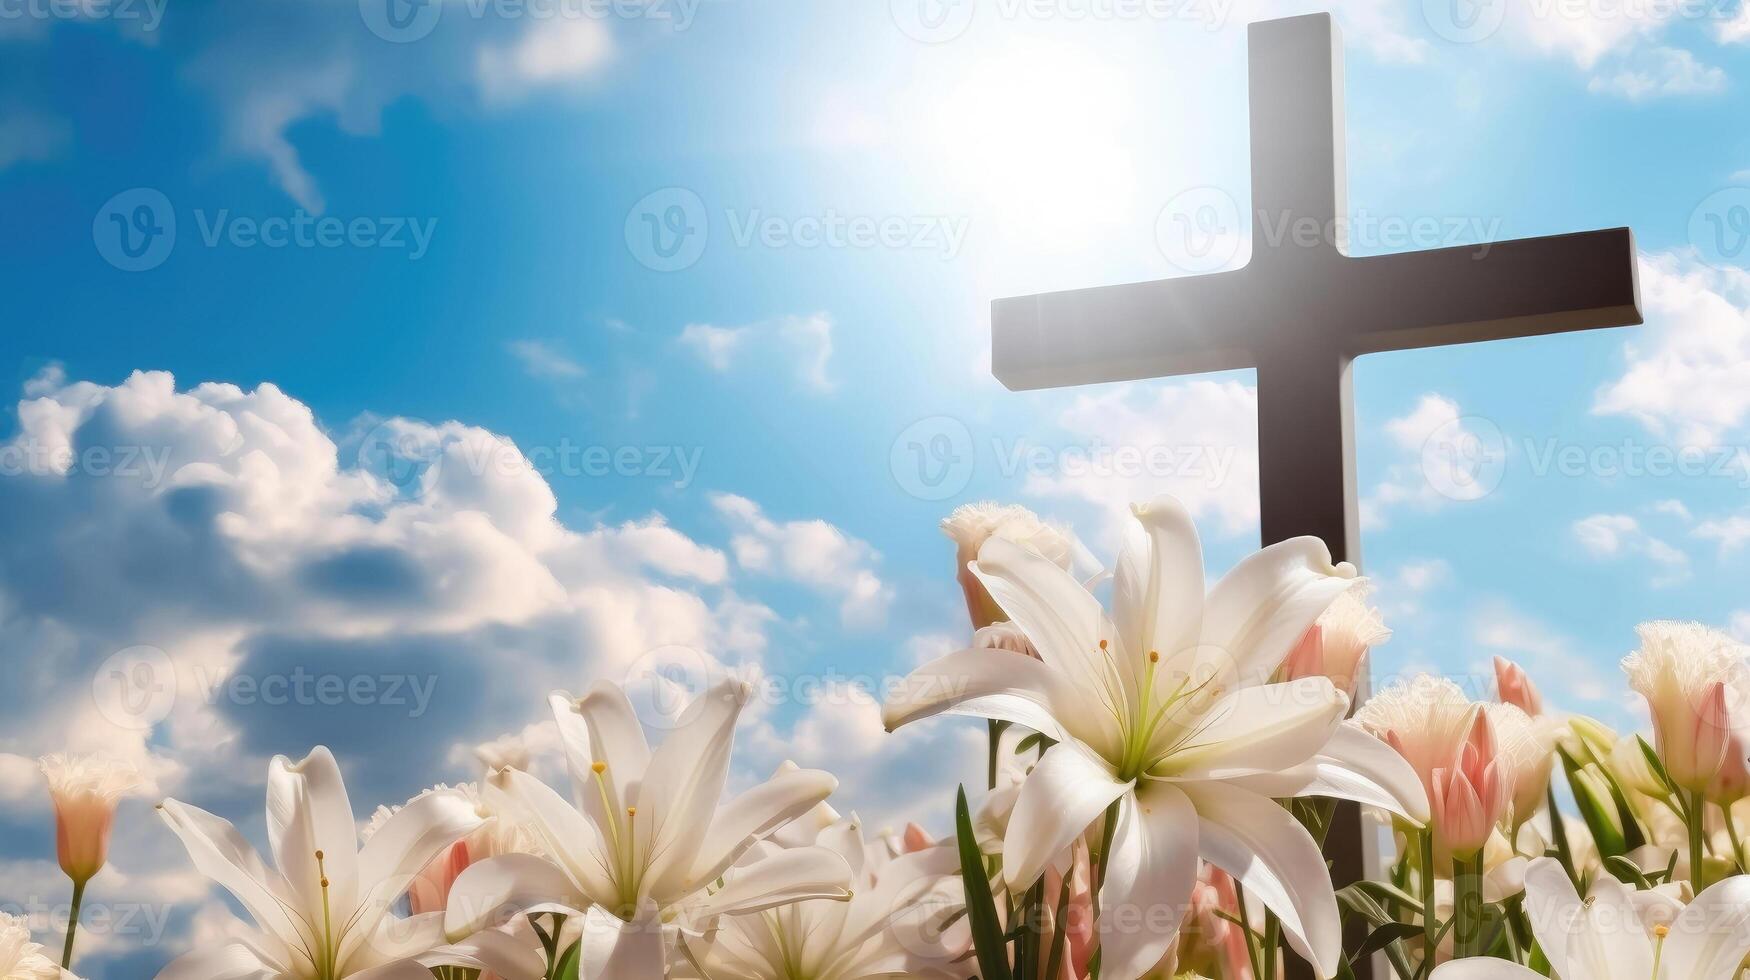 Eternal Hope - Wooden Cross and White Lilies Under Blue Sky photo